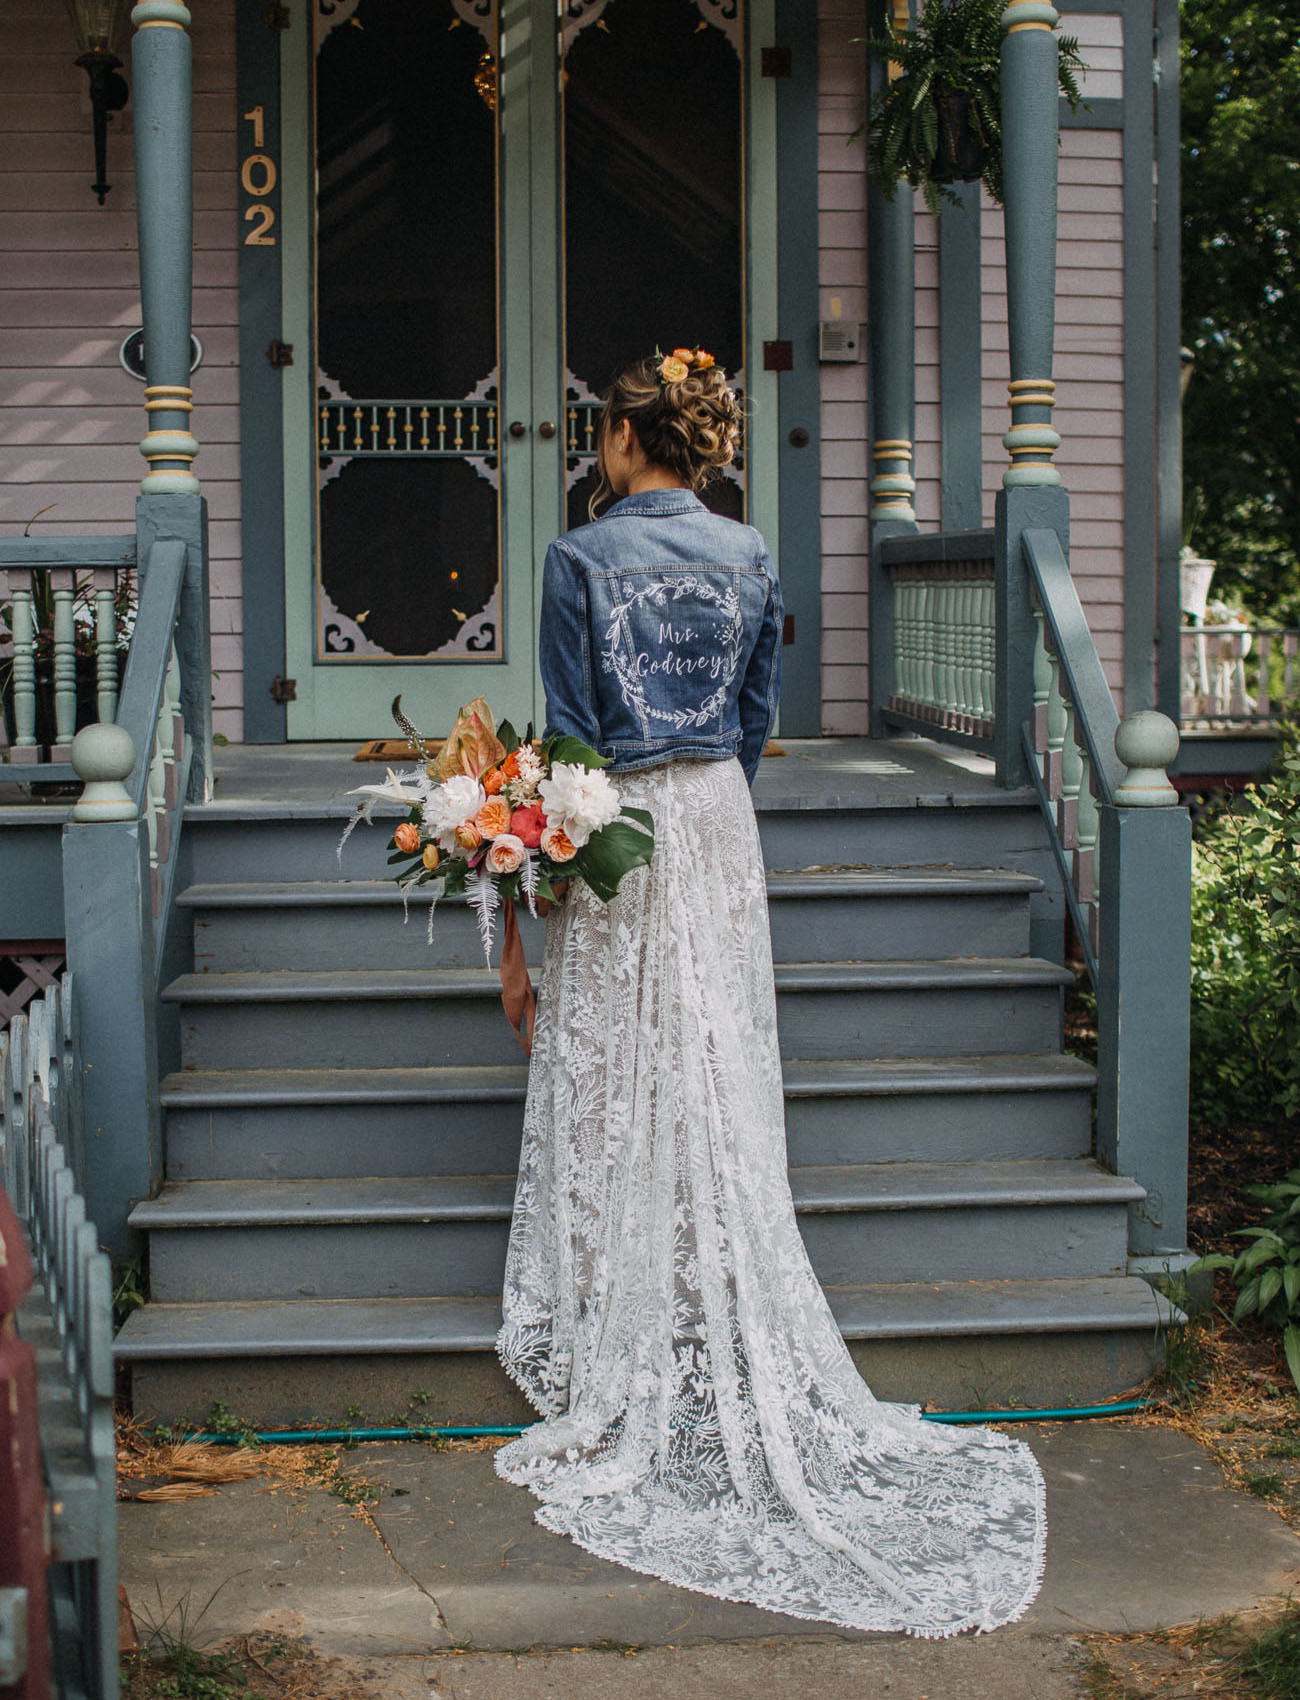 The bride covered up with a blue denim jacket that was personalized for her